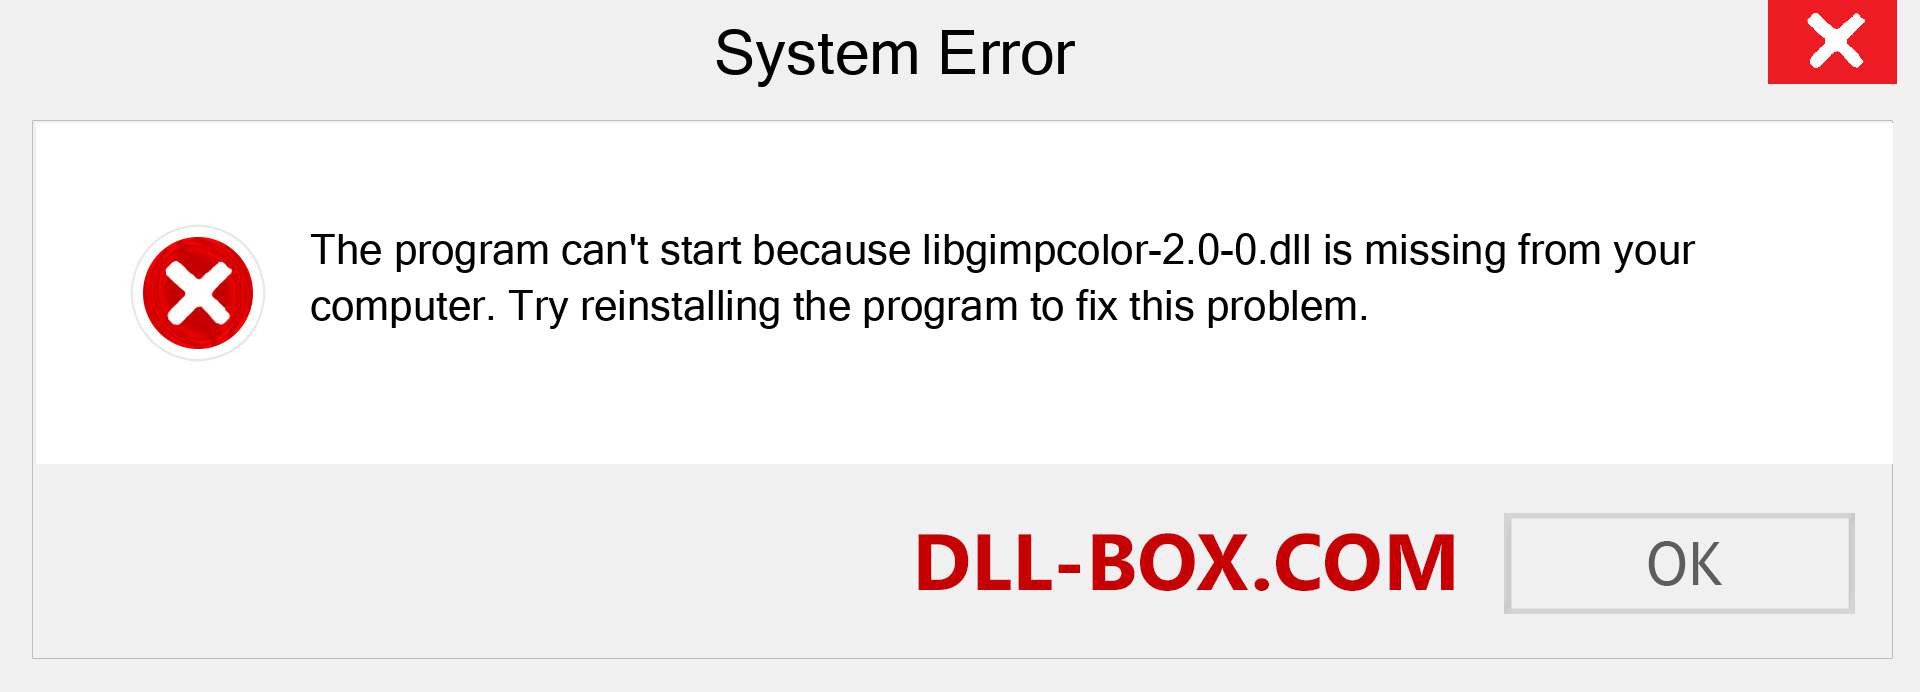  libgimpcolor-2.0-0.dll file is missing?. Download for Windows 7, 8, 10 - Fix  libgimpcolor-2.0-0 dll Missing Error on Windows, photos, images